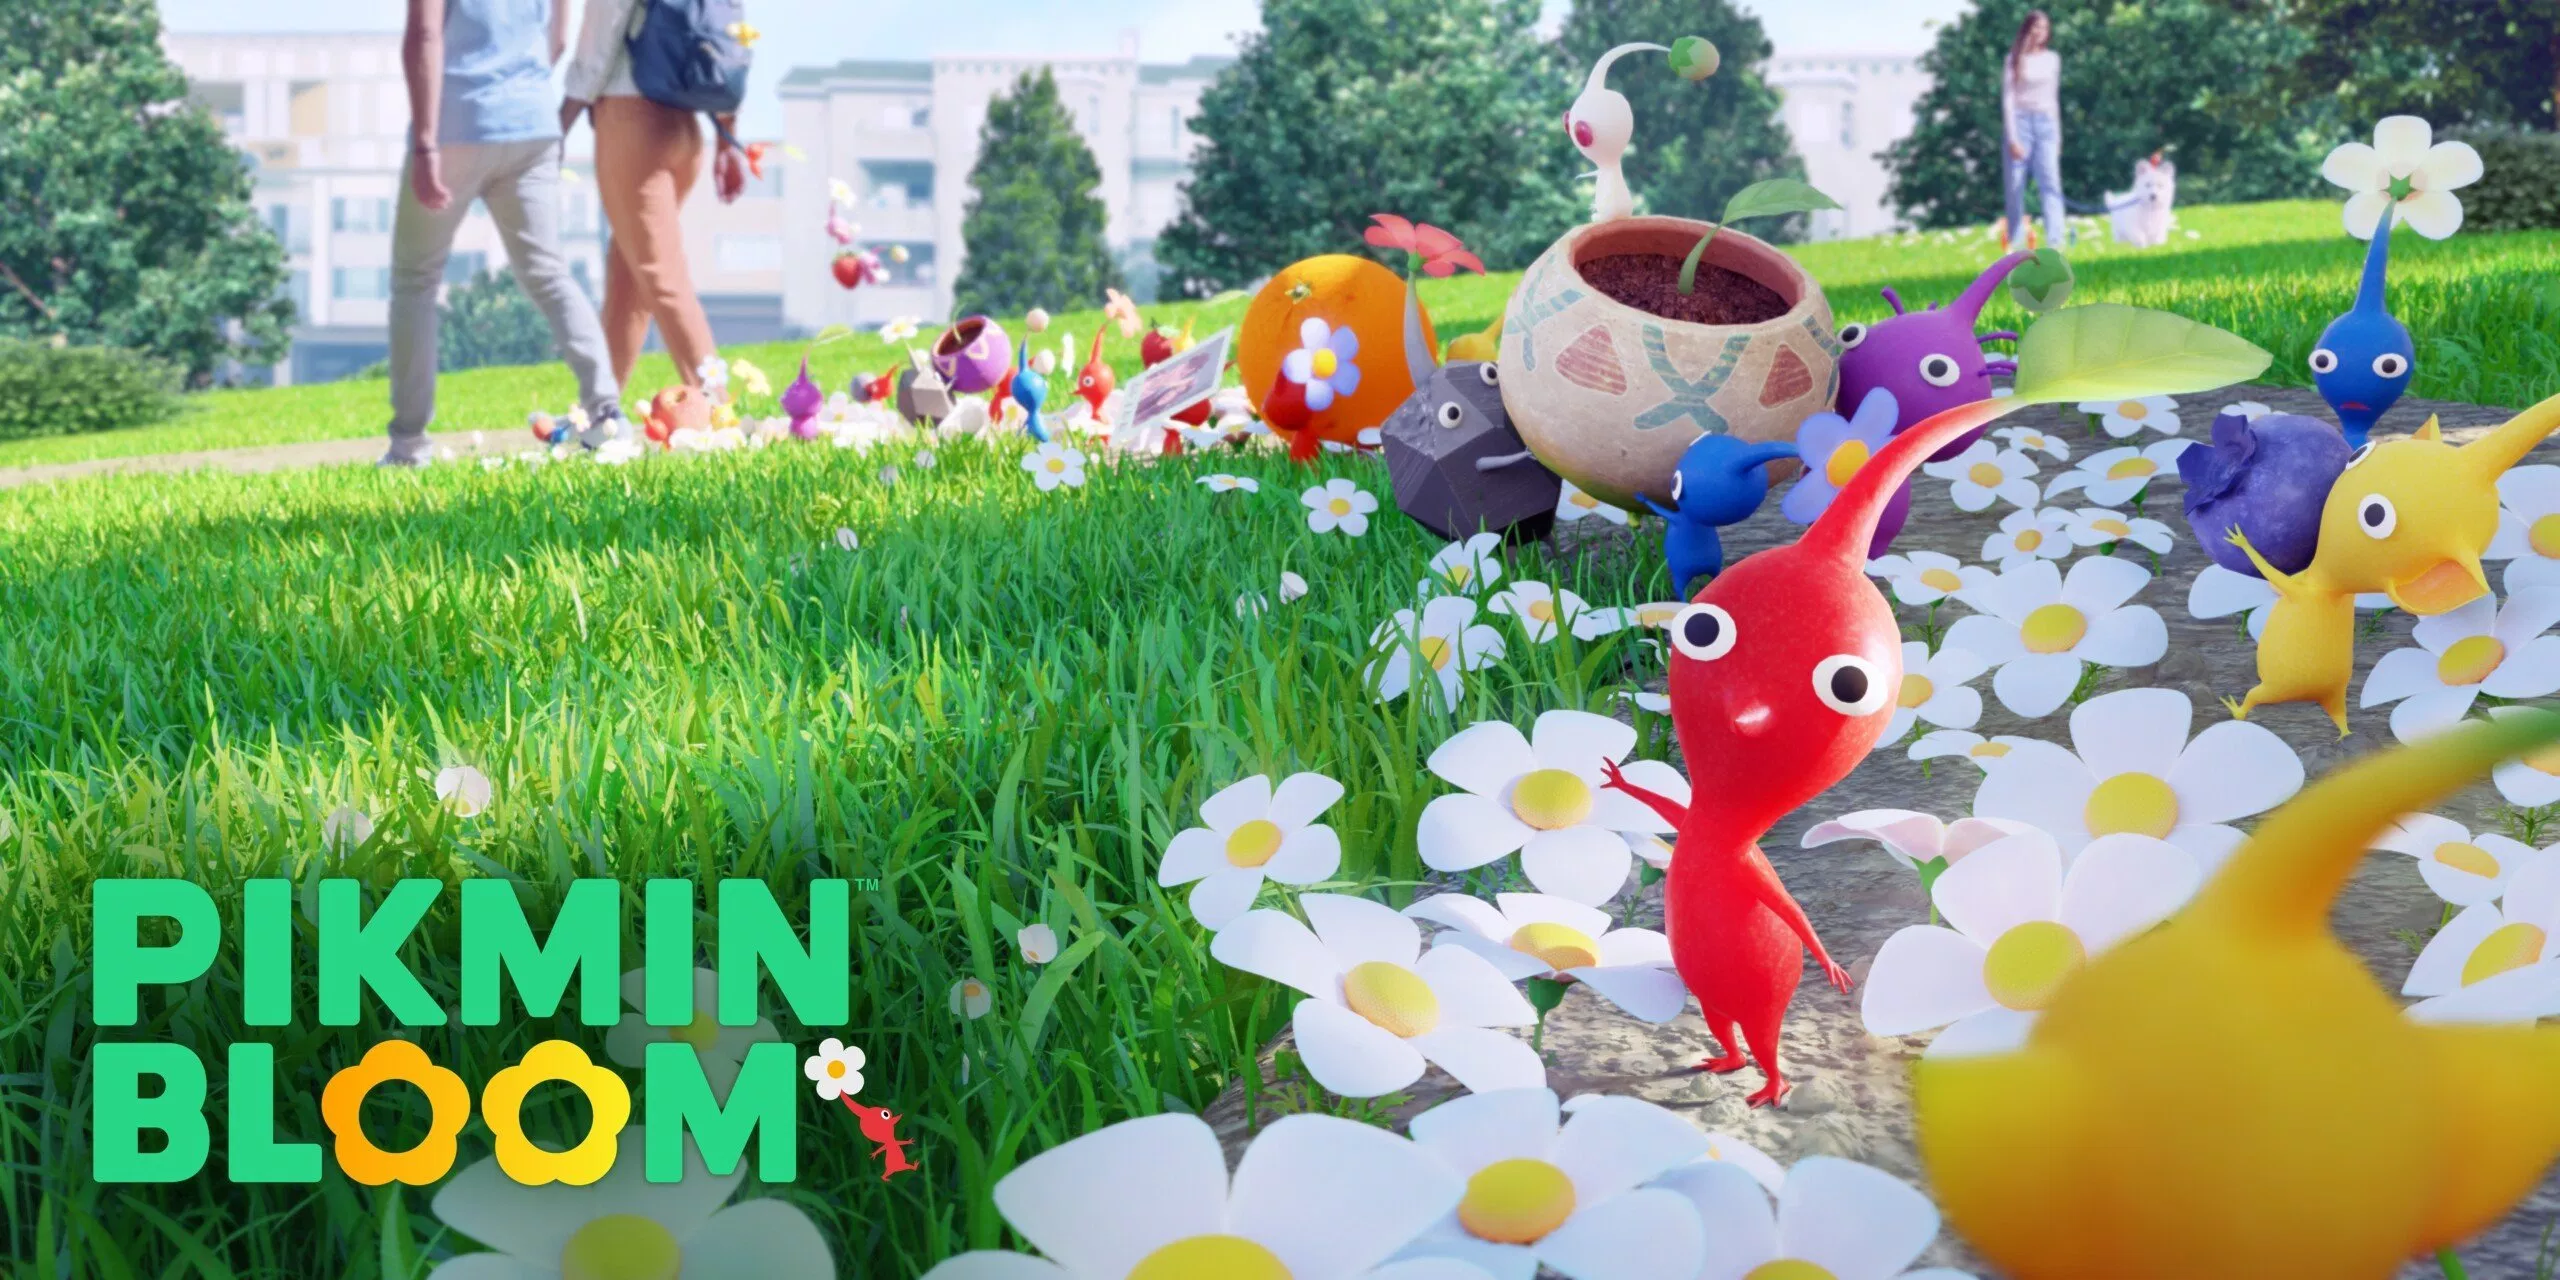 Here S The Pikmin Bloom Apk Download Link For Android Dot Esports